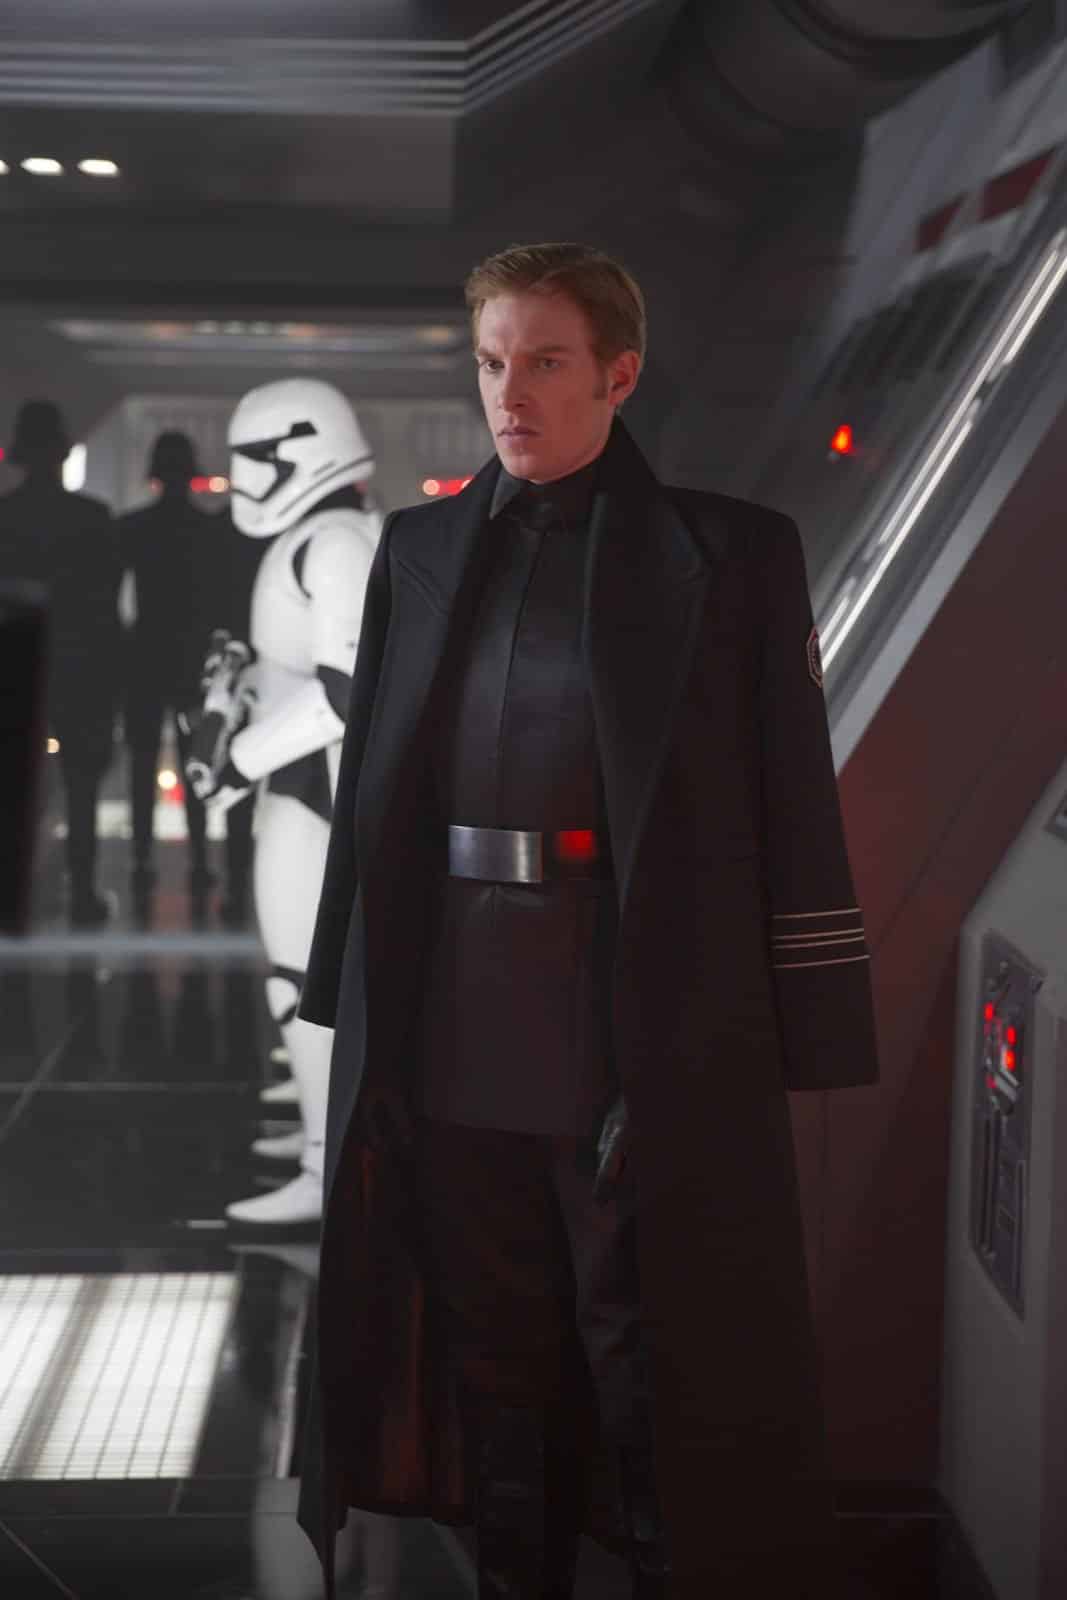 Star Wars VII The Force Awakens 16 - General Hux of the First Order